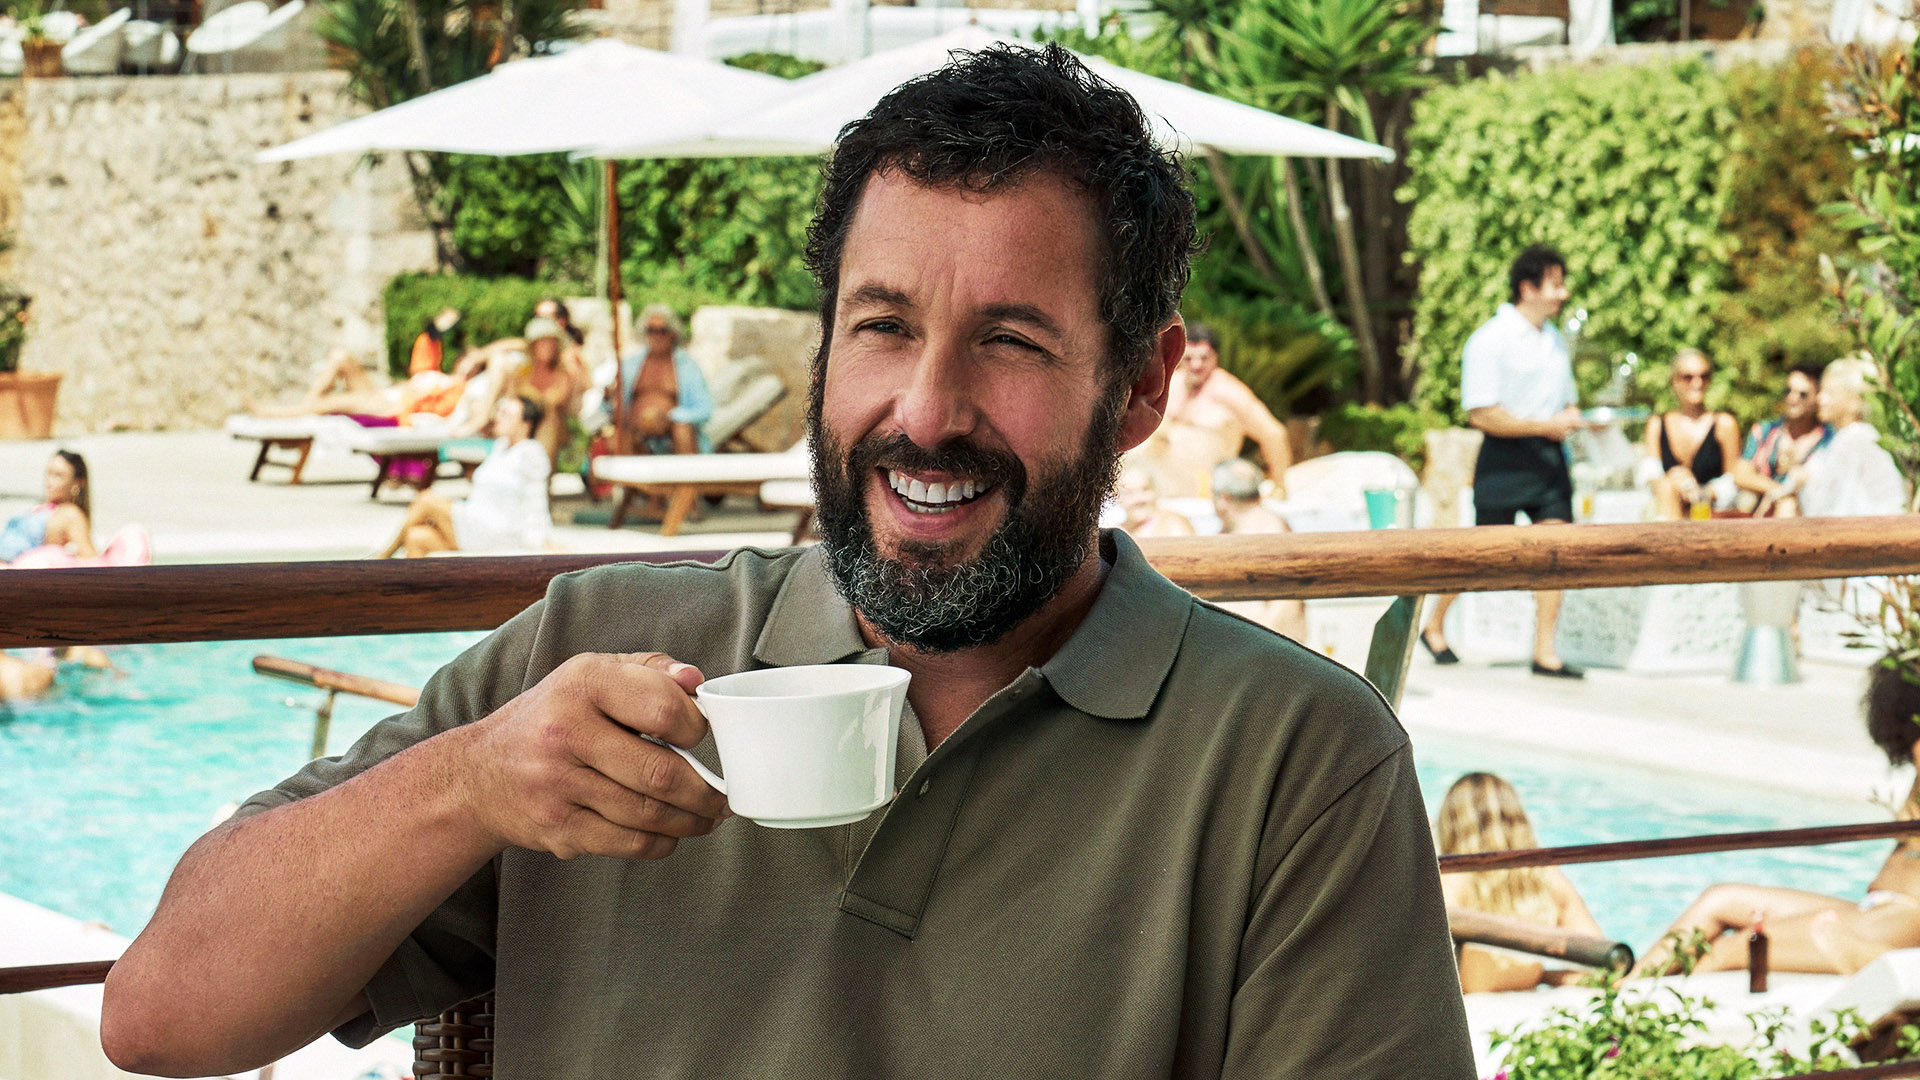 8 Best Adam Sandler Movies Ranked By Rotten Tomatoes Score